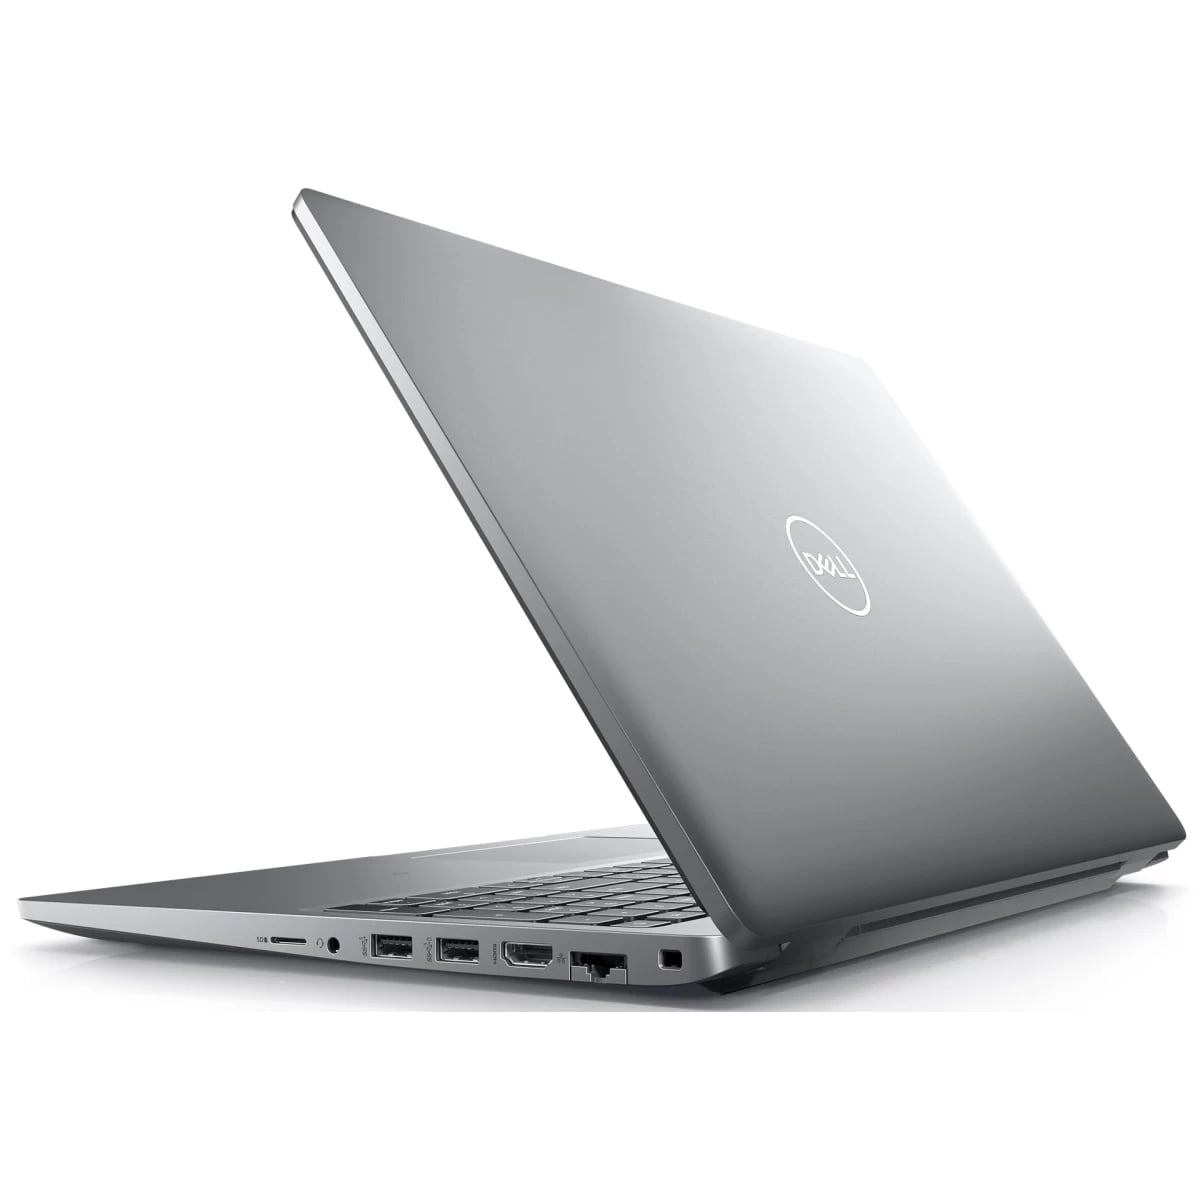 Dell NEW Latitude 5530 15 12Gen Intel Core i7 up to 4.7GHz 12M Cash 10-Cores